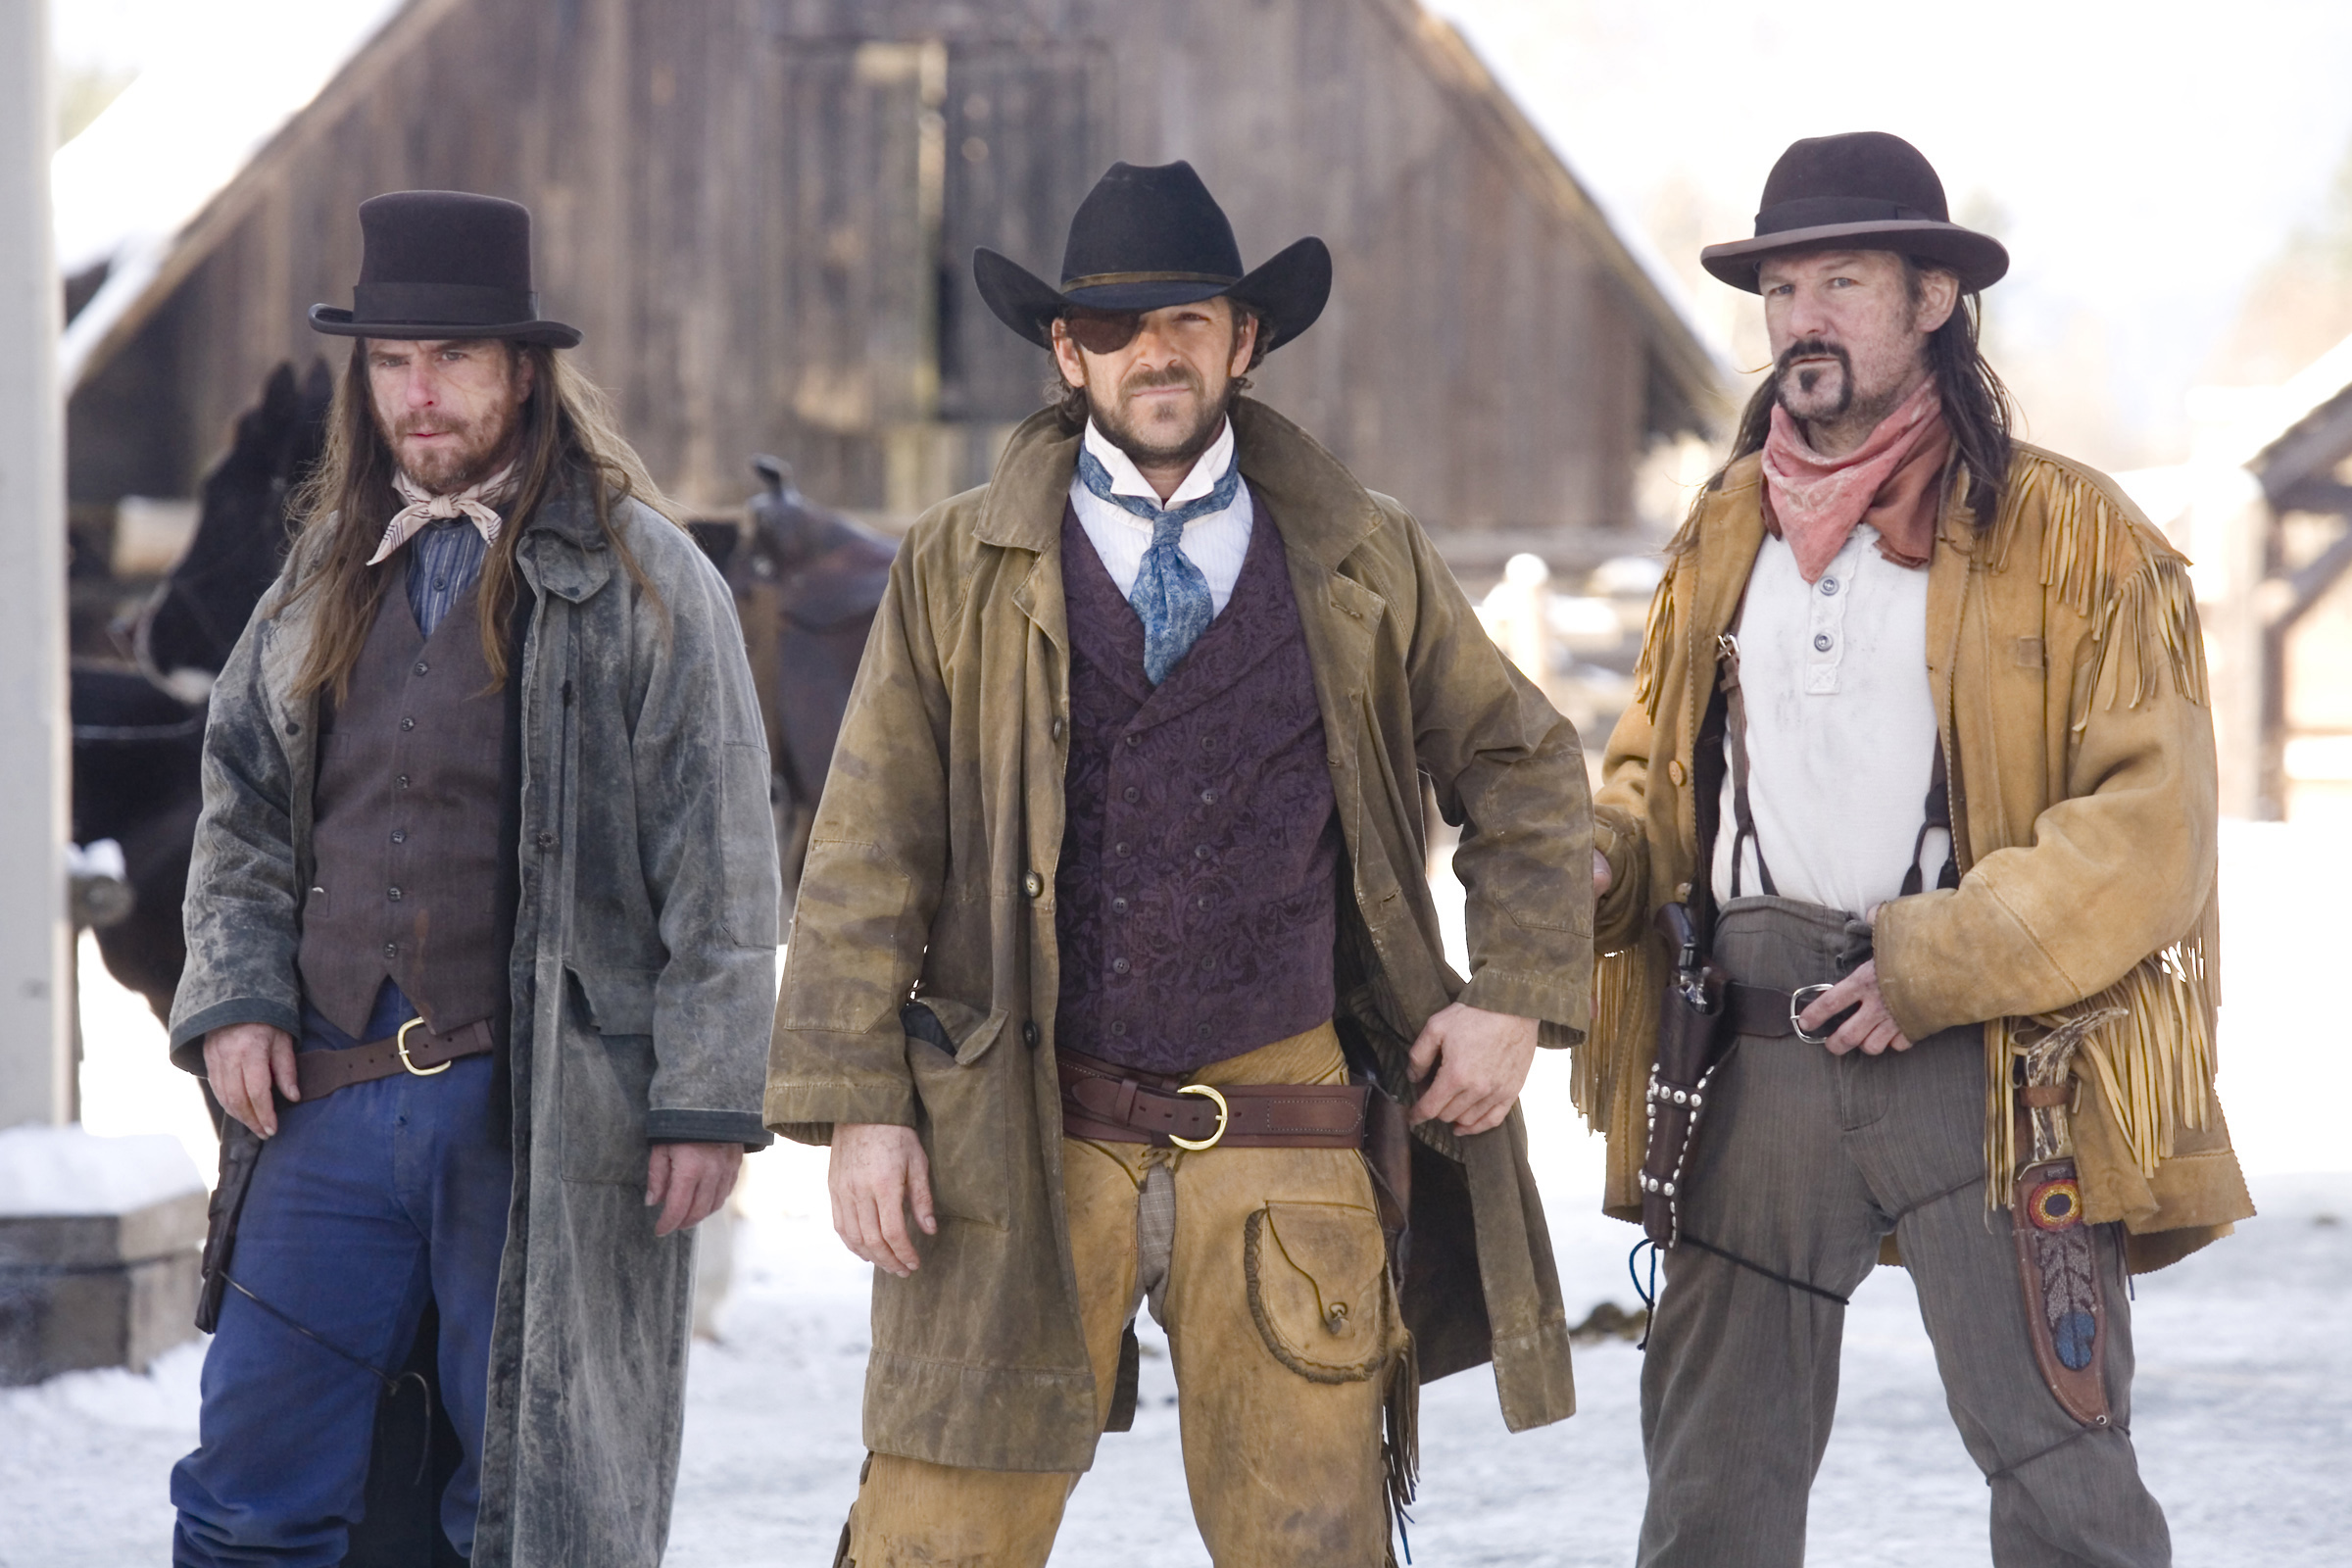 Three men in cowboy hats standing in the snowy wilderness of a western.